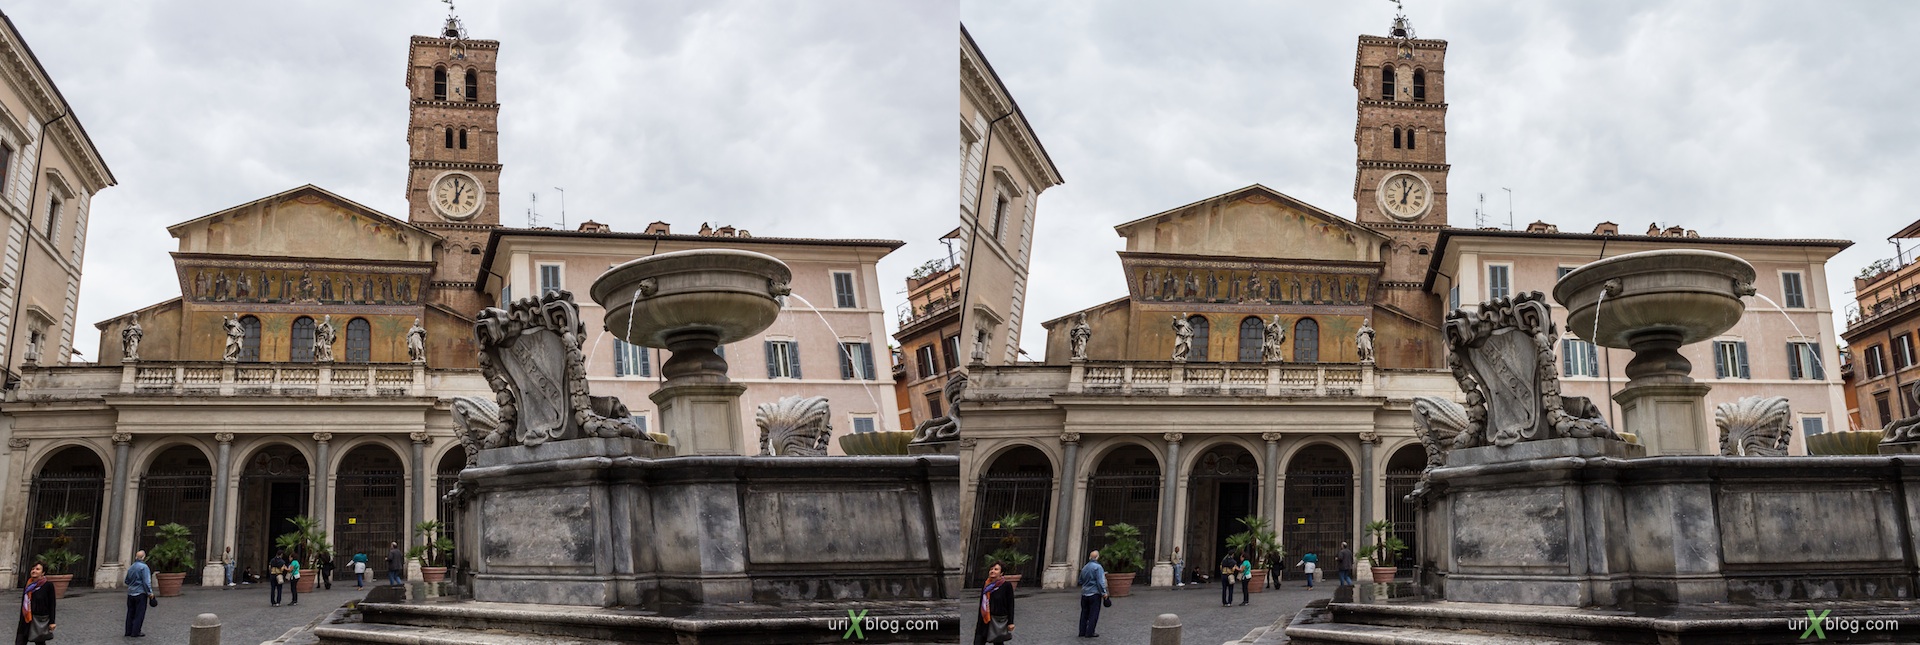 2012, fountain, Santa Maria in Trastevere, square, church, Rome, Italy, 3D, stereo pair, cross-eyed, crossview, cross view stereo pair